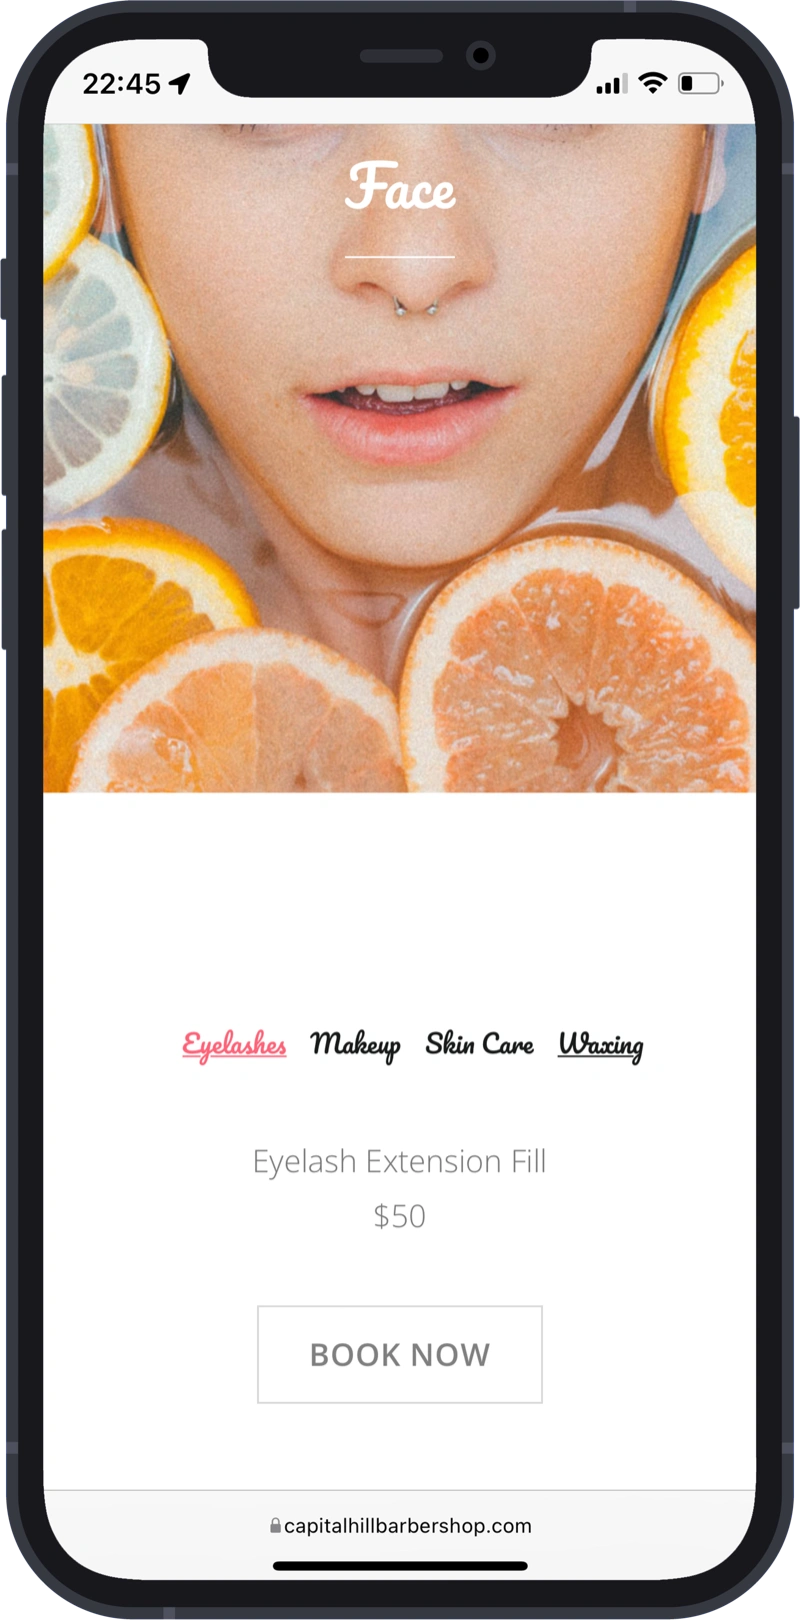 capital hill barbershop website face care section on mobile device